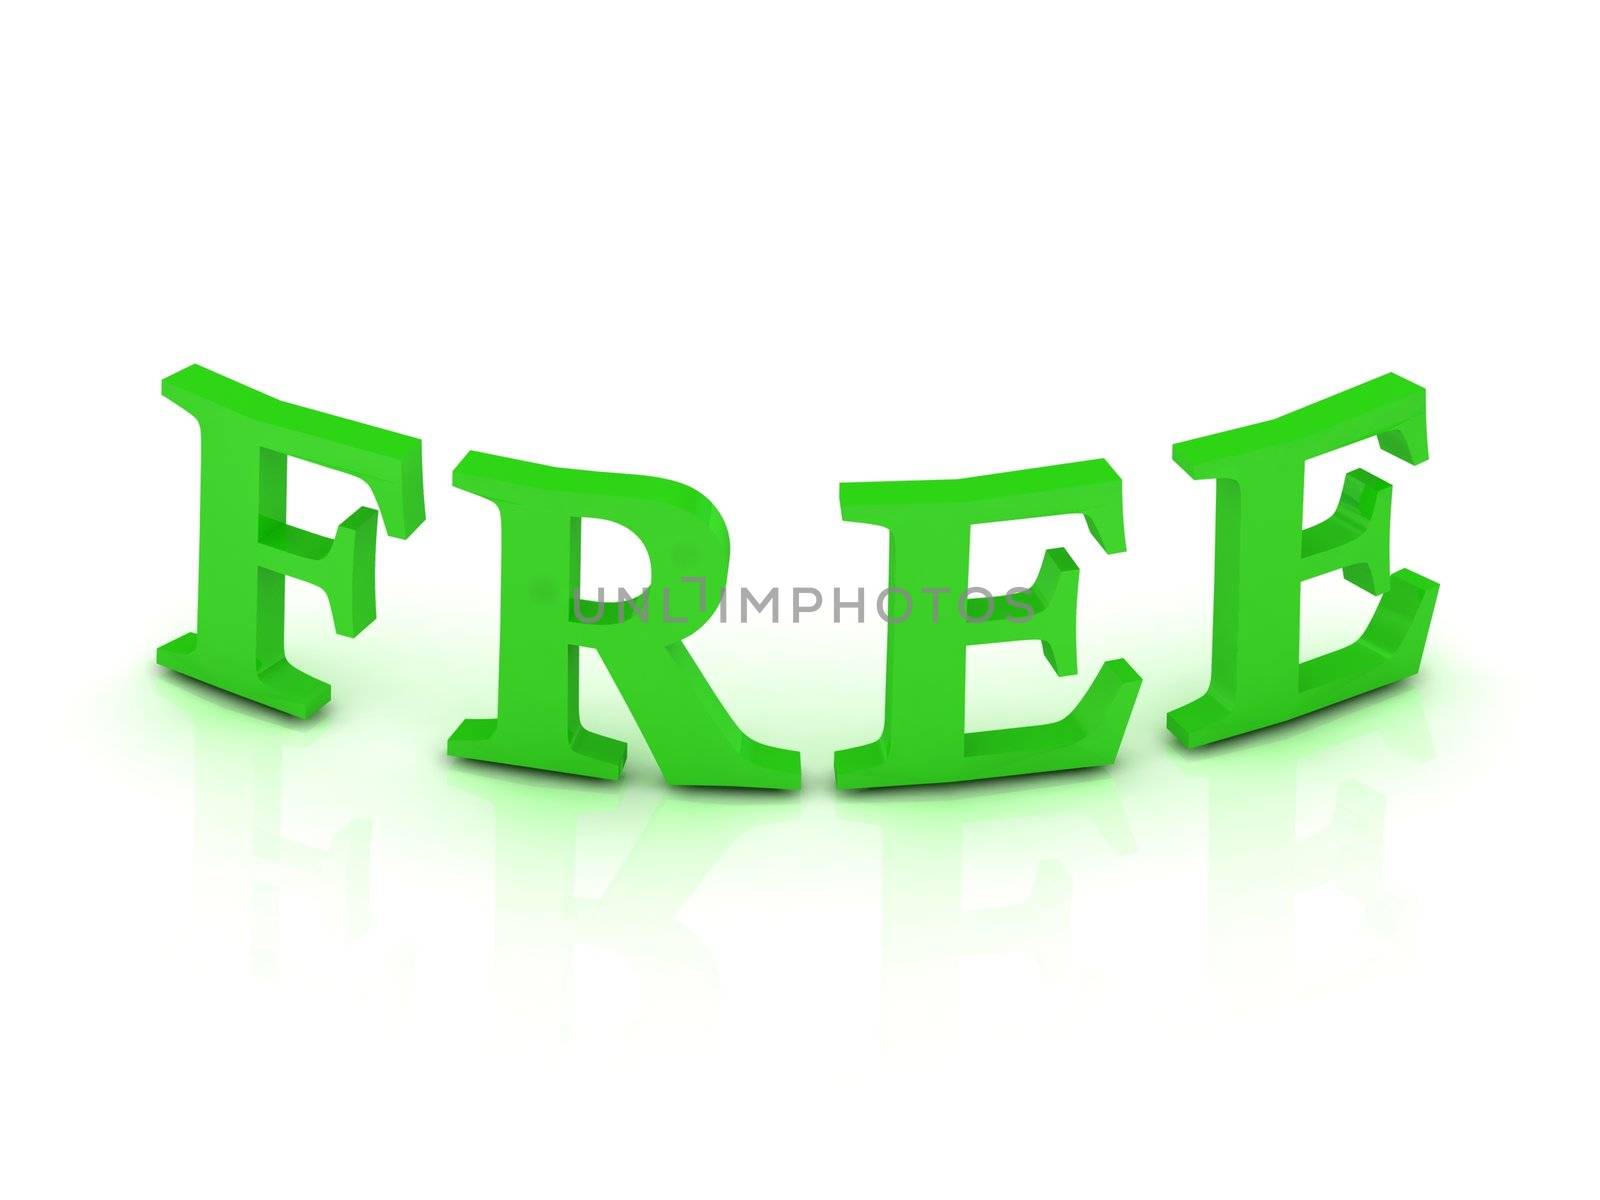 FREE sign with green letters on isolated white background